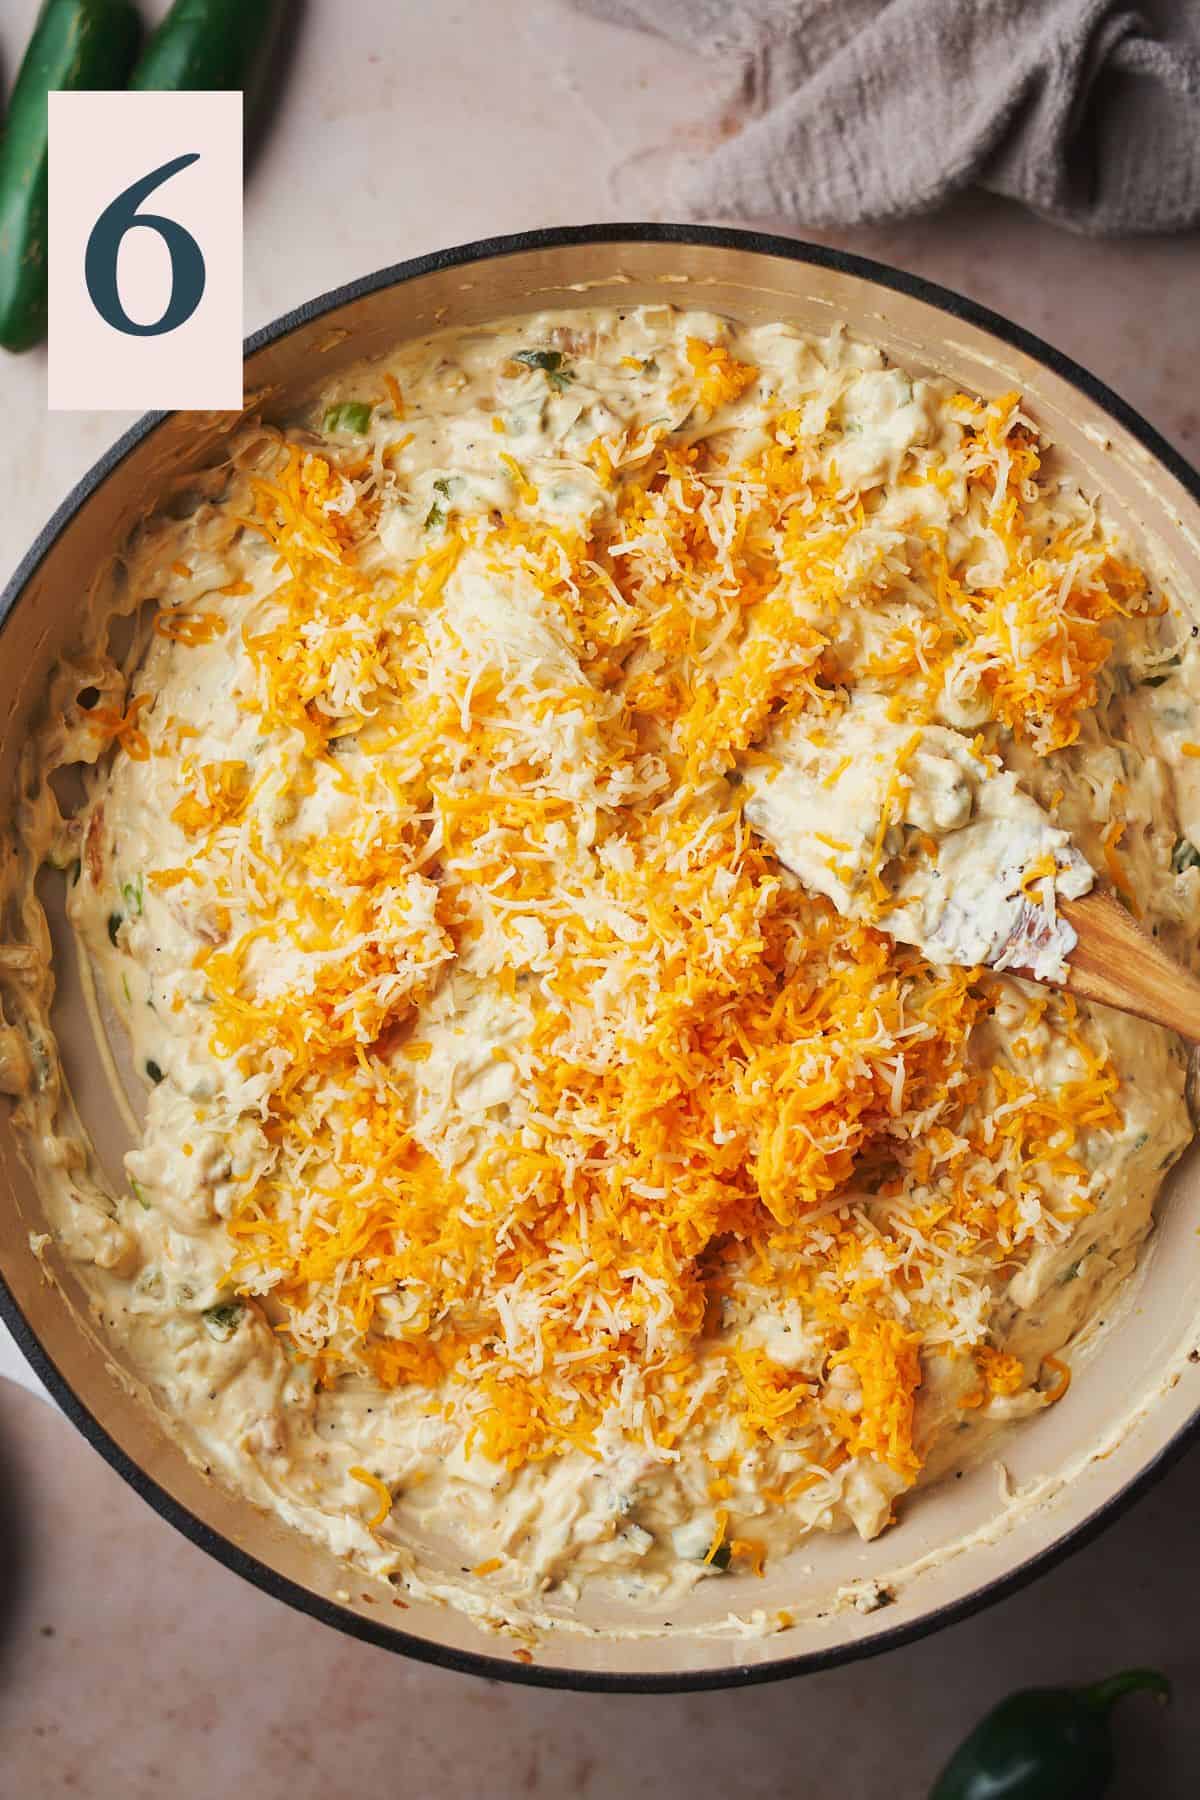 Shredded cheese added to a cream cheese mixture in a skillet.